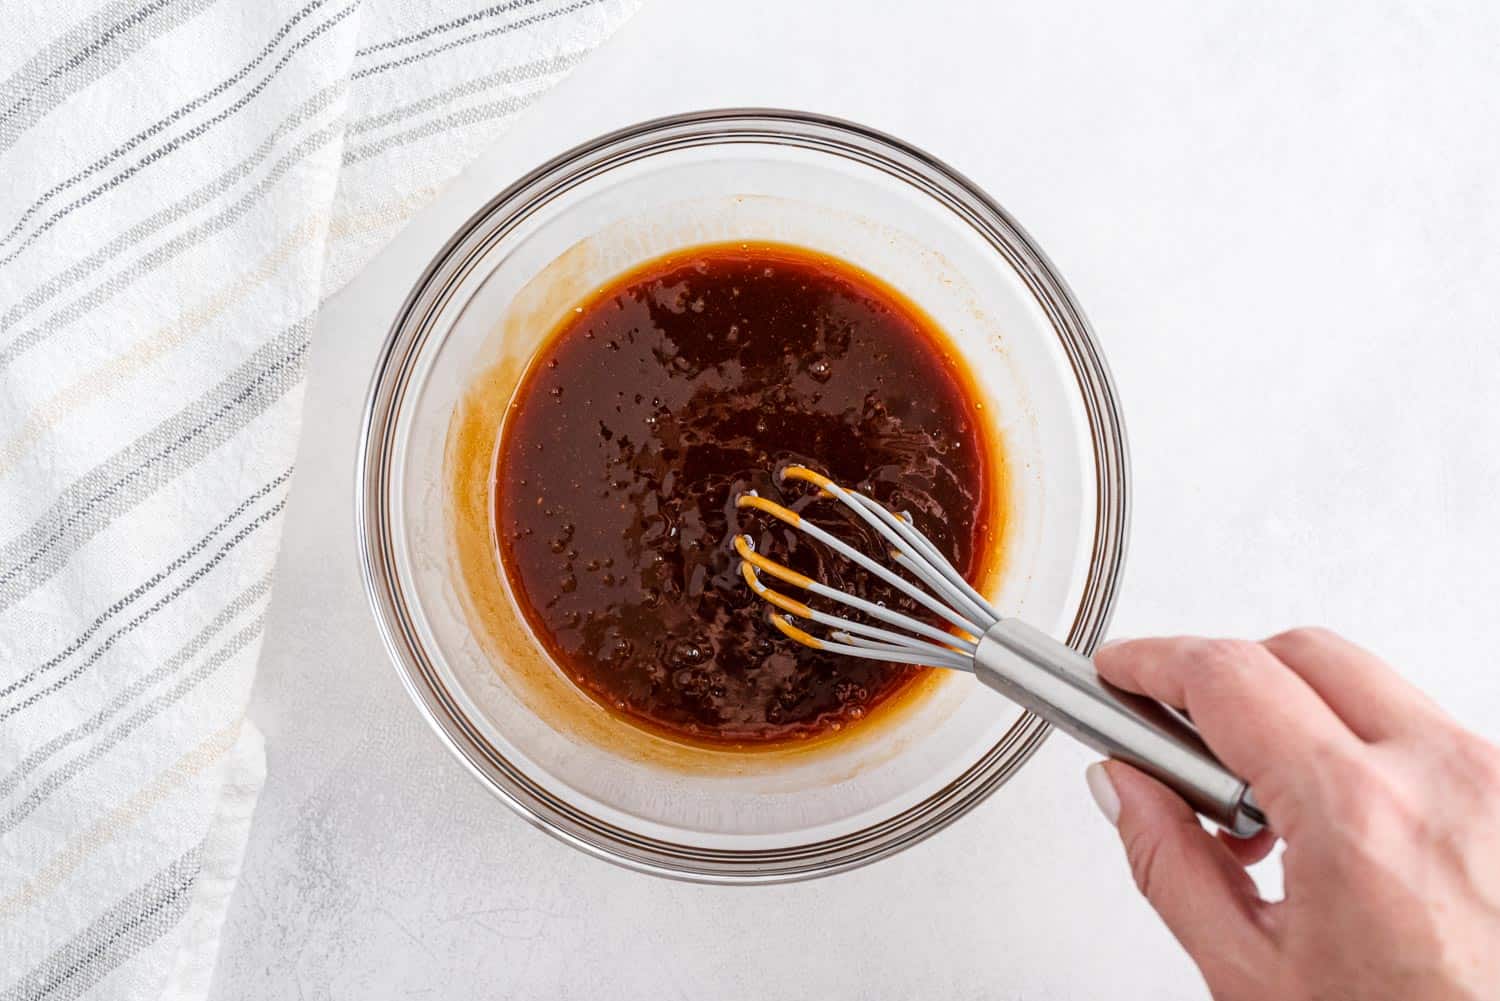 Sauce being whisked together in a small glass bowl.